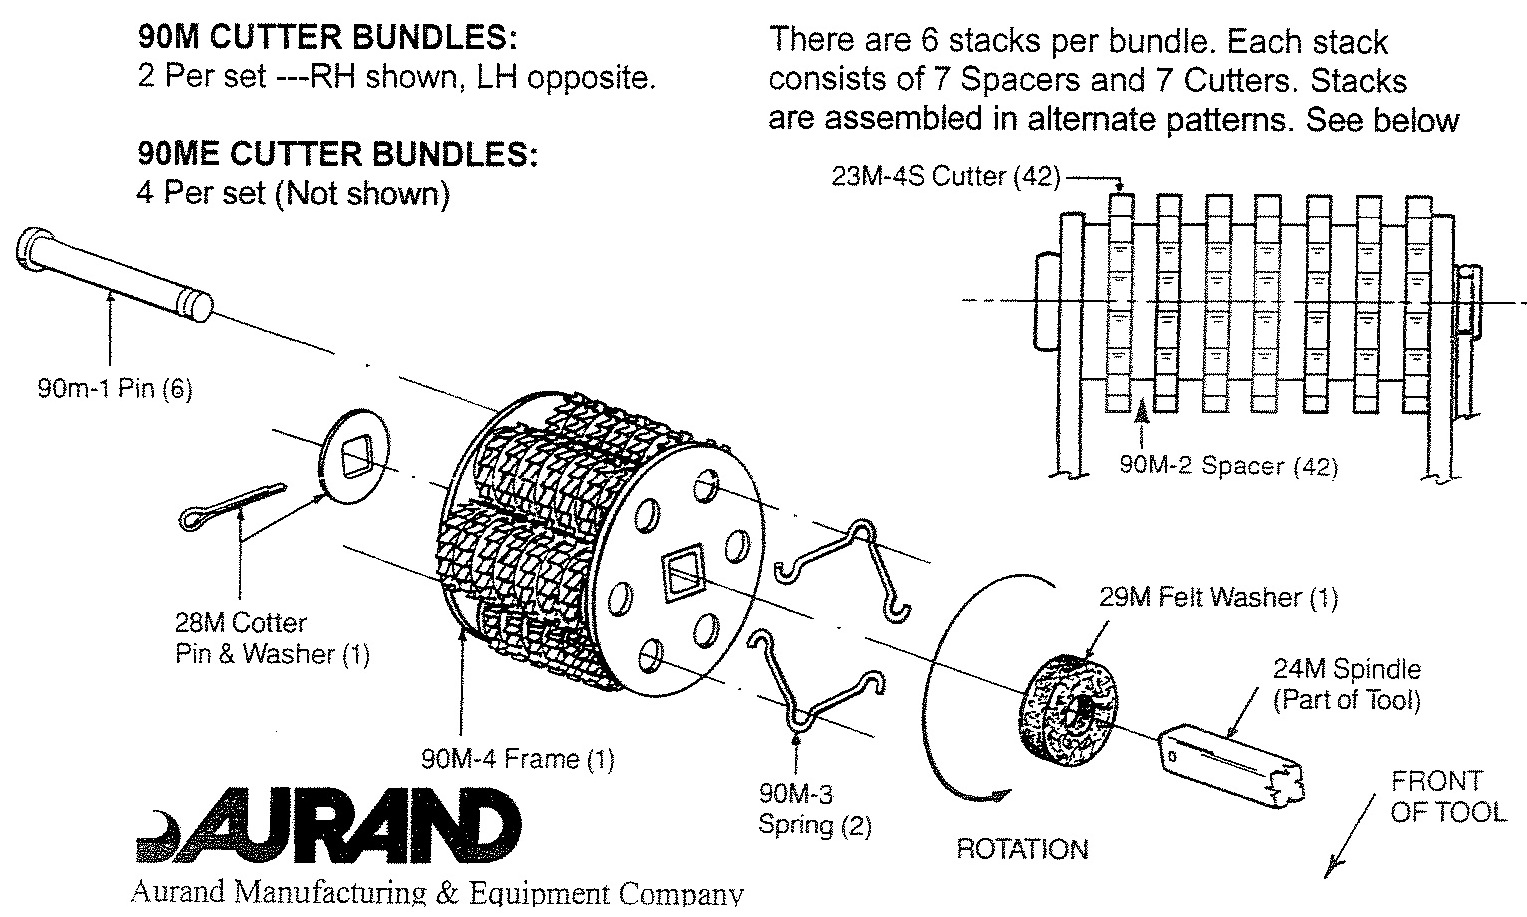 Aurand - 90M-3 Spacer for Cutter Bundle